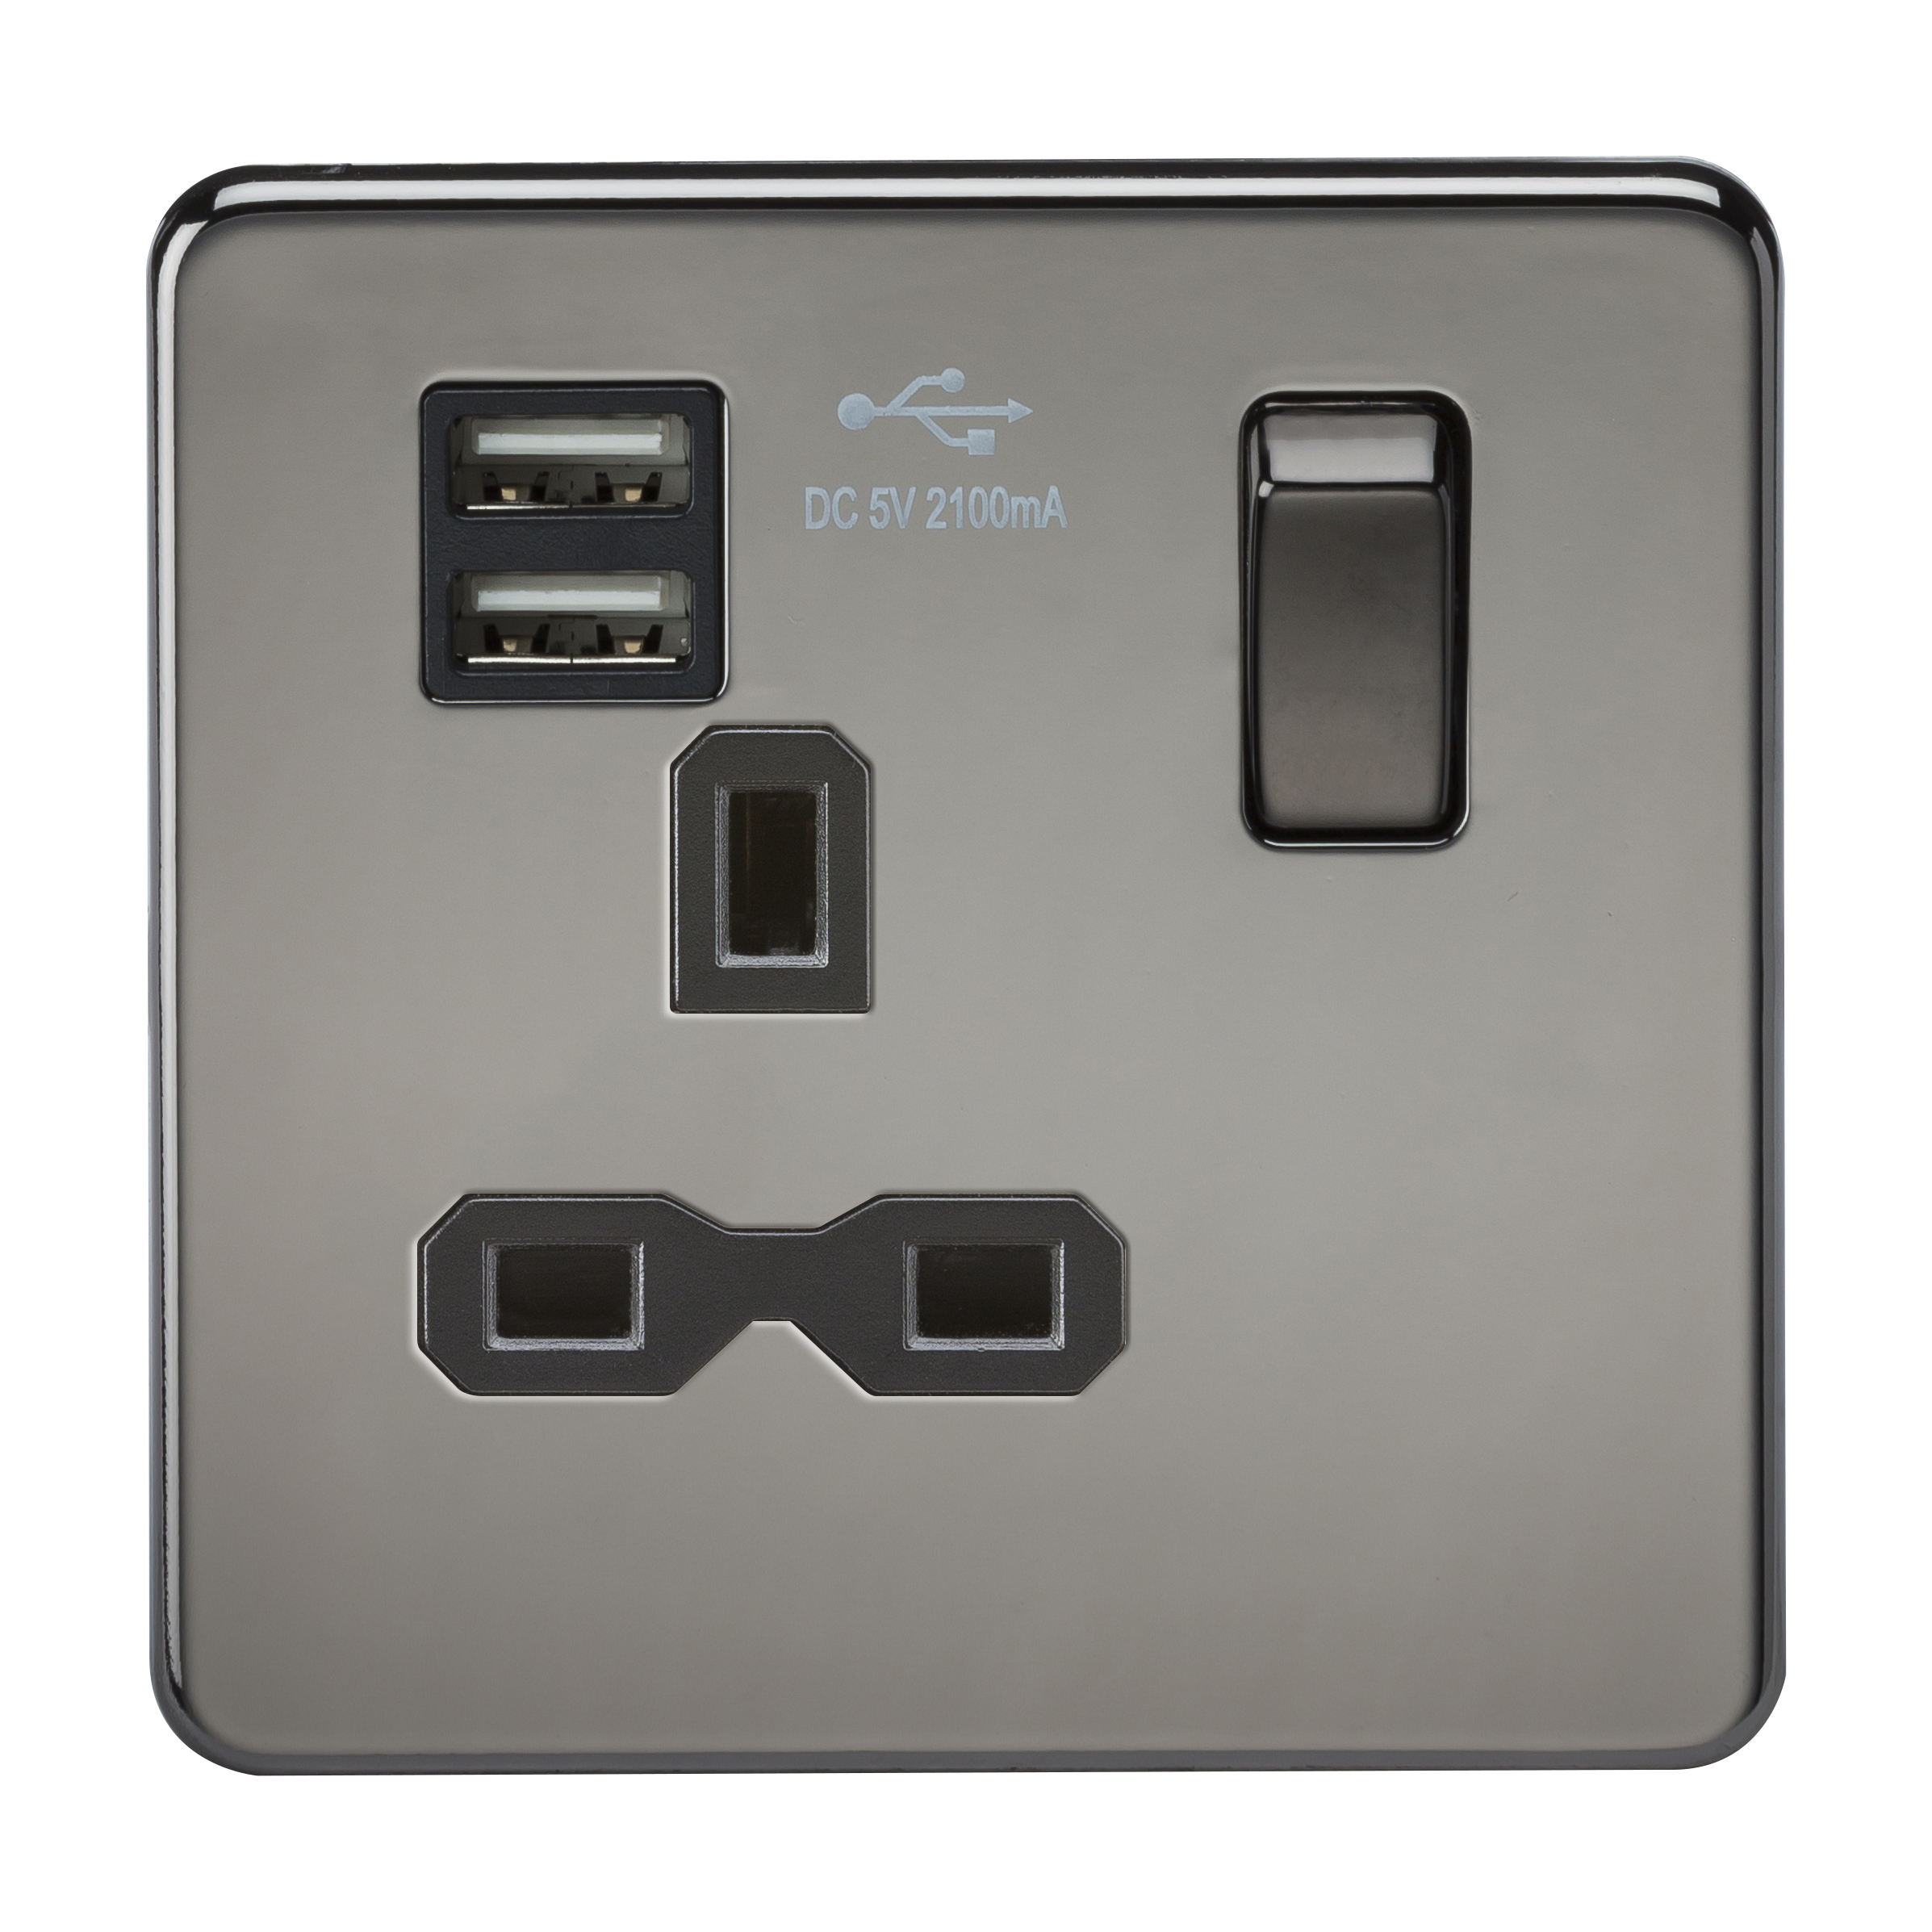 Screwless 13A 1G Switched Socket With Dual USB Charger (2.1A) - Black Nickel With Black Insert - SFR9901BN 